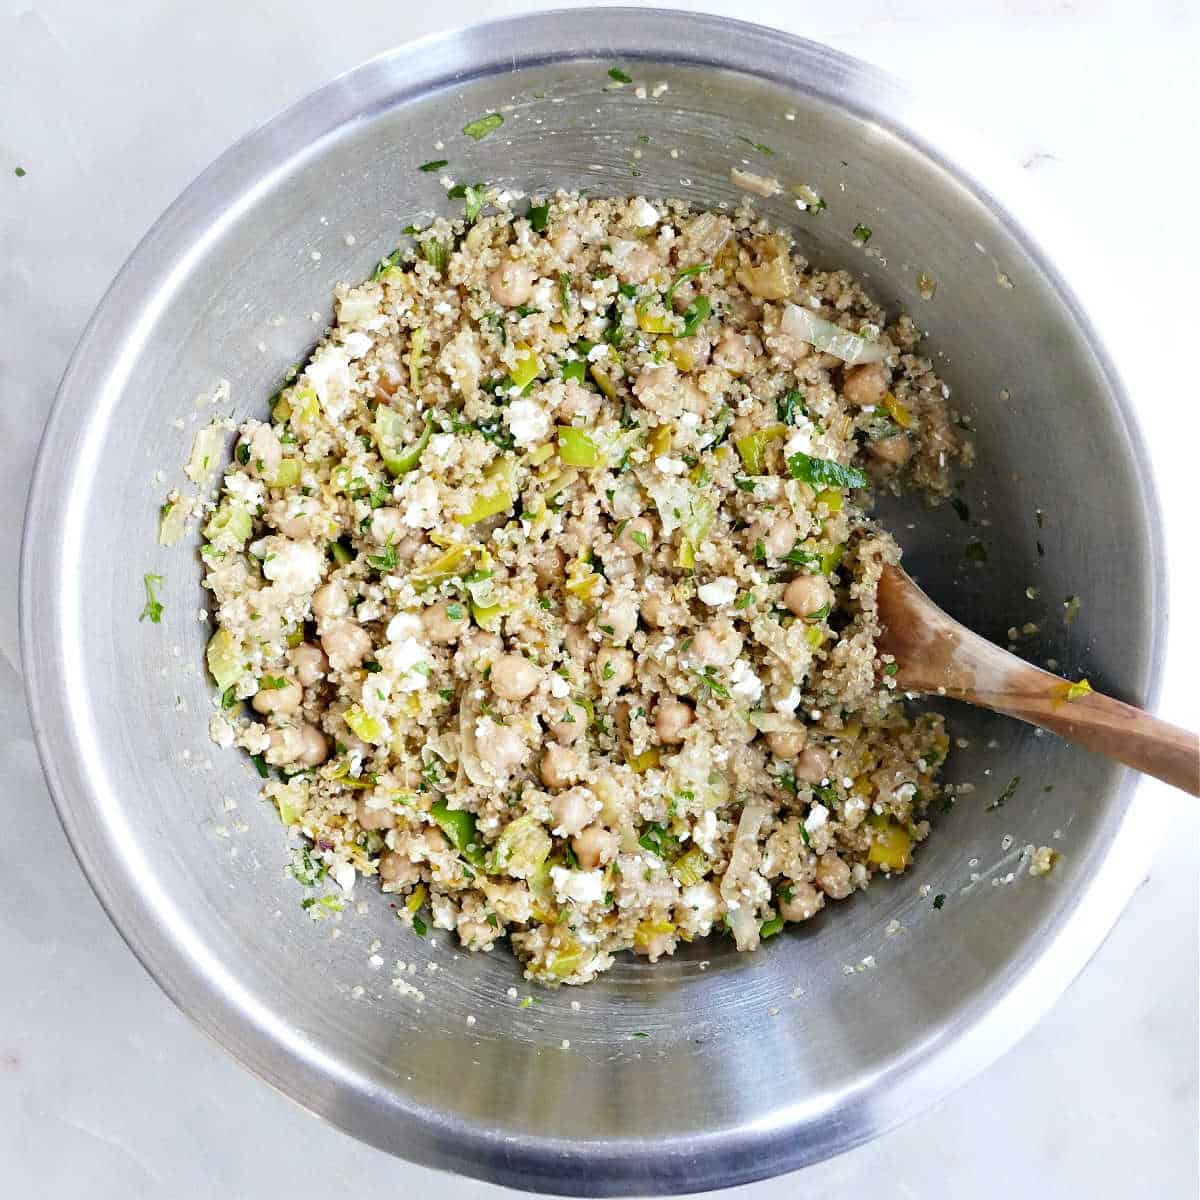 Quinoa leek salad in a stainless steel mixing bowl with a wooden spoon.